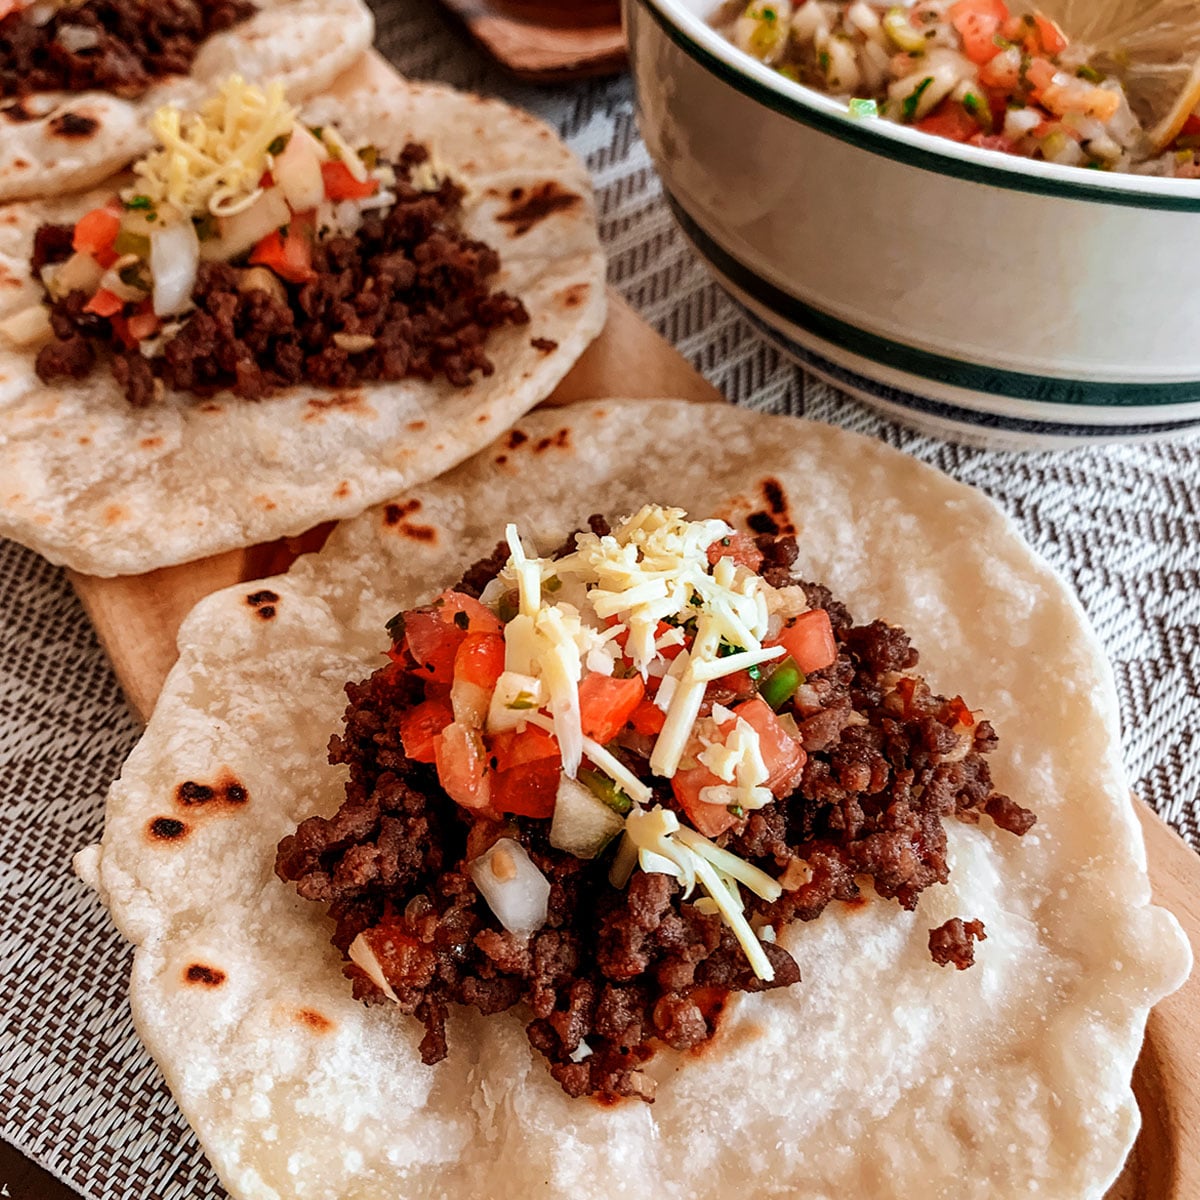 Are you looking for a way to reheat taco meat that tastes as good as when you first cooked it? You can have delicious taco meat that's hot and ready to eat in just a few simple steps